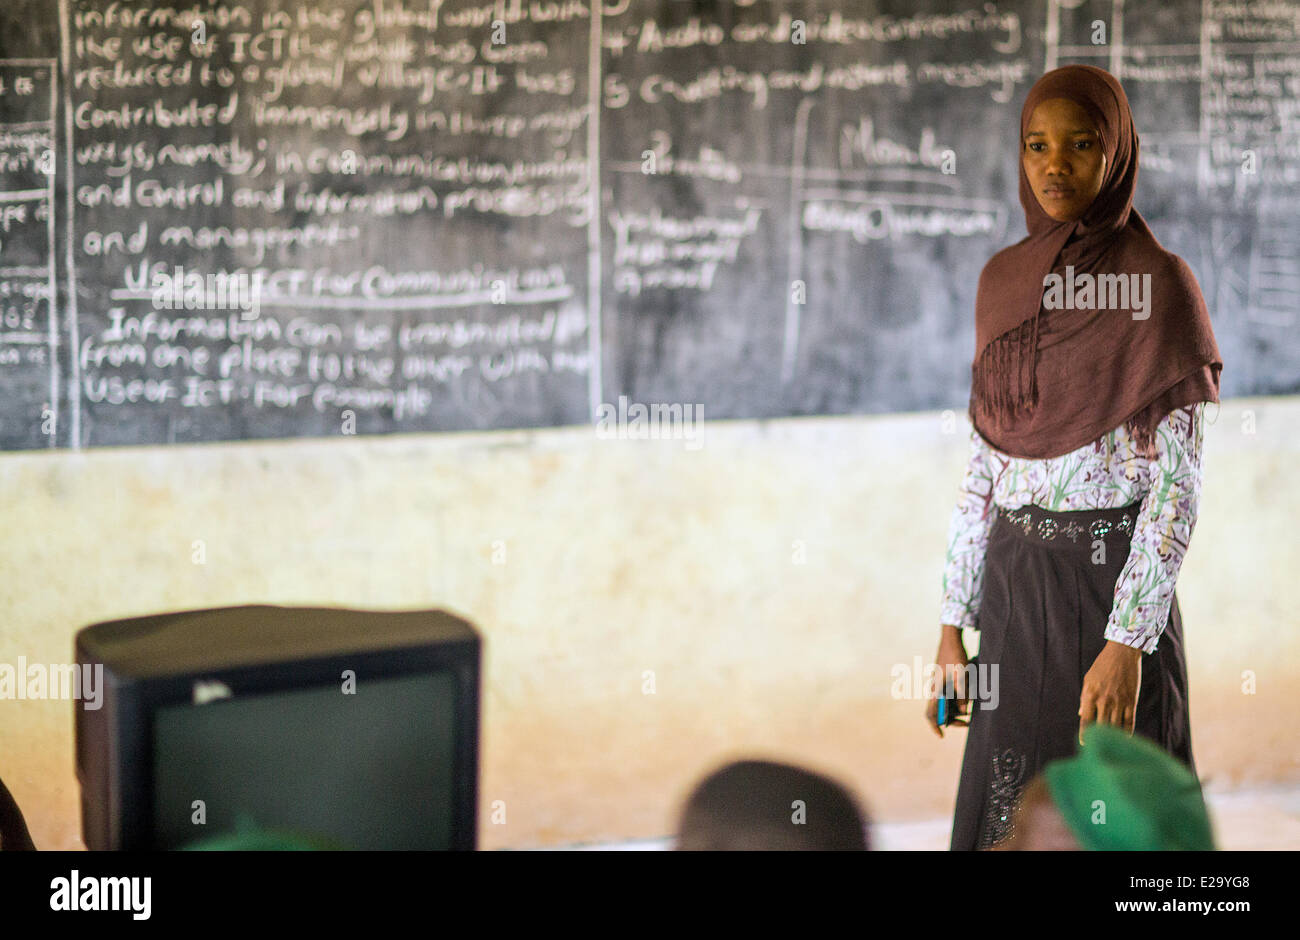 Ijebu Ode, Nigeria. 11th June, 2014. A teacher stands at a blackboard during a class session at the Muslim Girl's High School in Ijebu Ode, Nigeria, 11 June 2014. The state-run secondary school is a school for girls only with predominantly Muslim students attending, aged between 11 and 18. Photo: Hannibal Hanschke/dpa/Alamy Live News Stock Photo